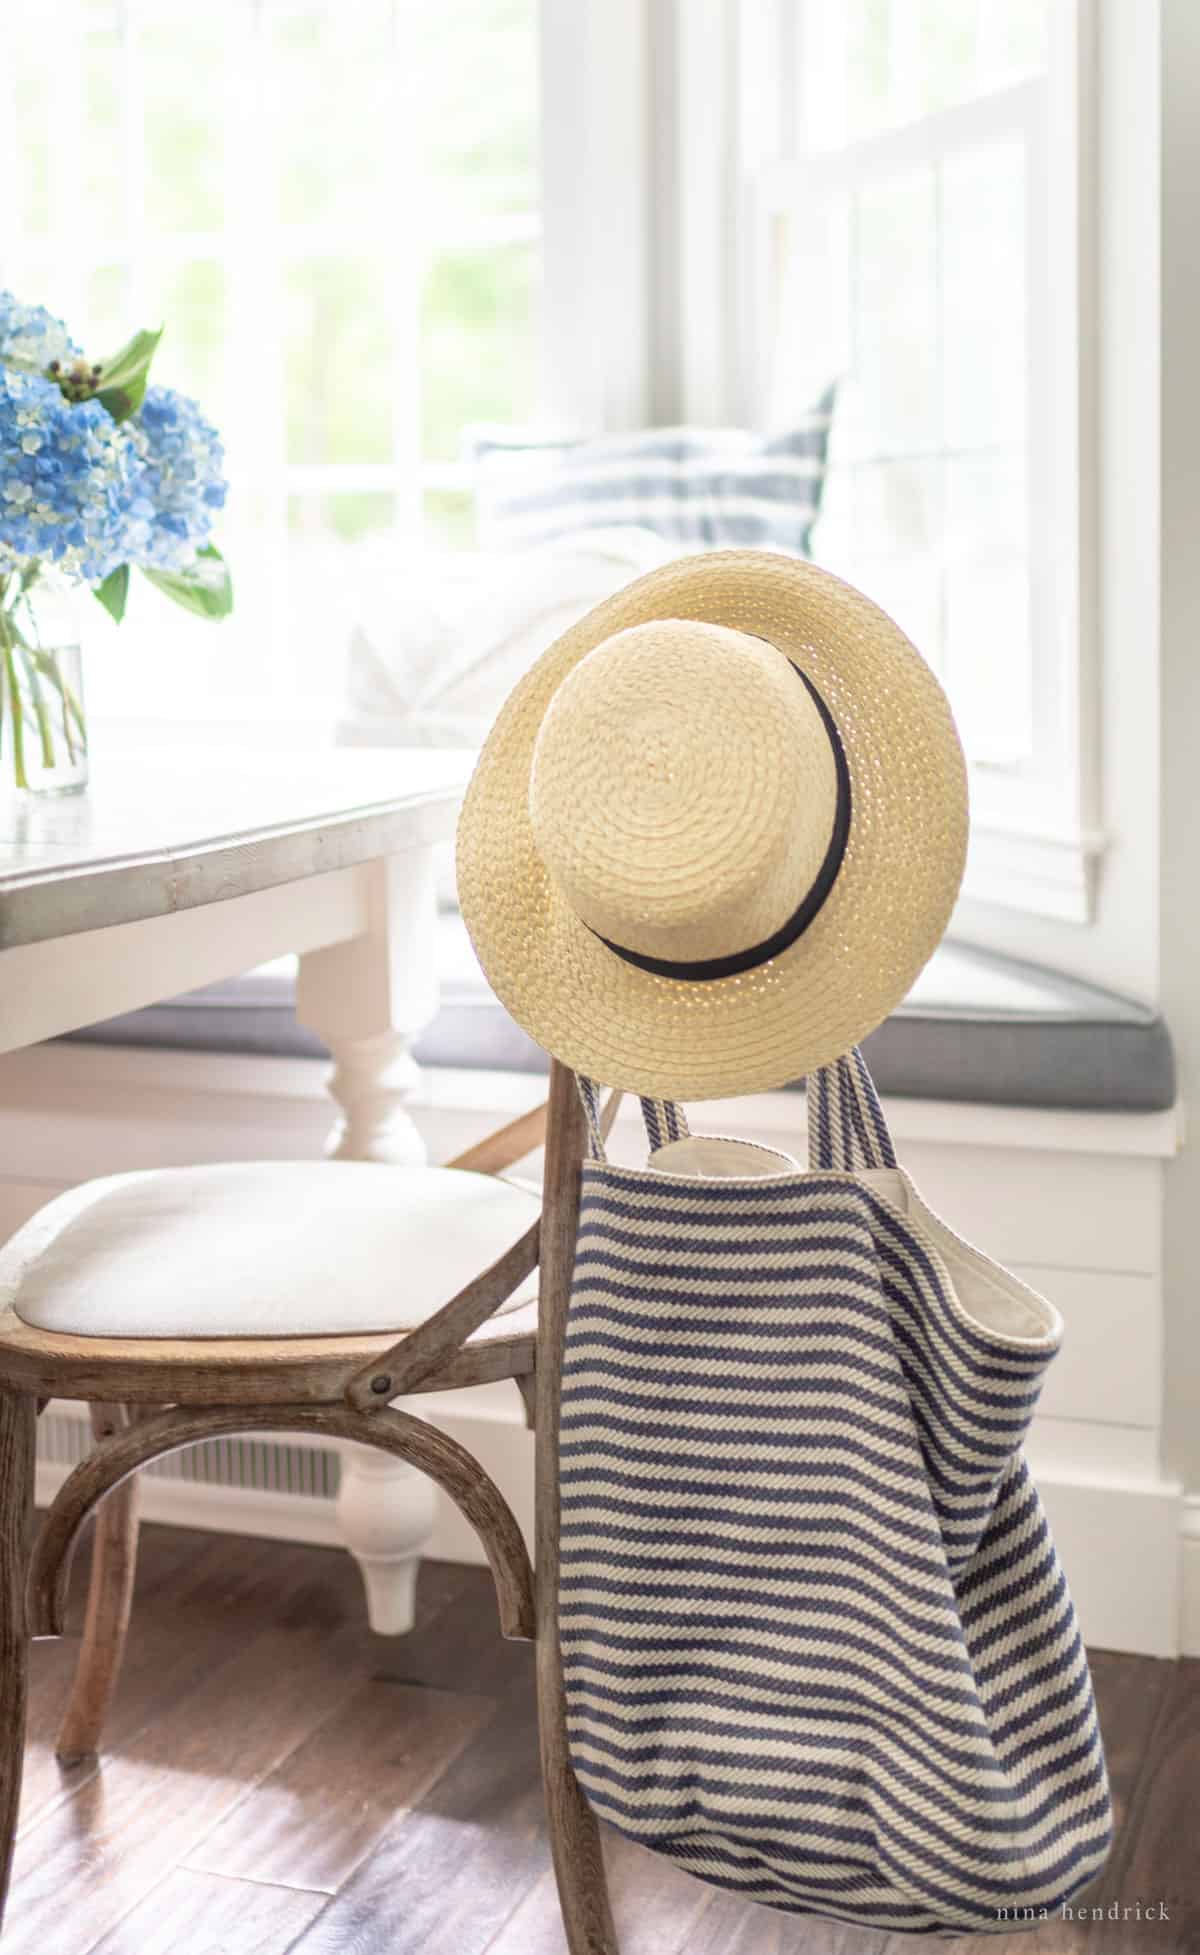 sunny dining room with hat and bag